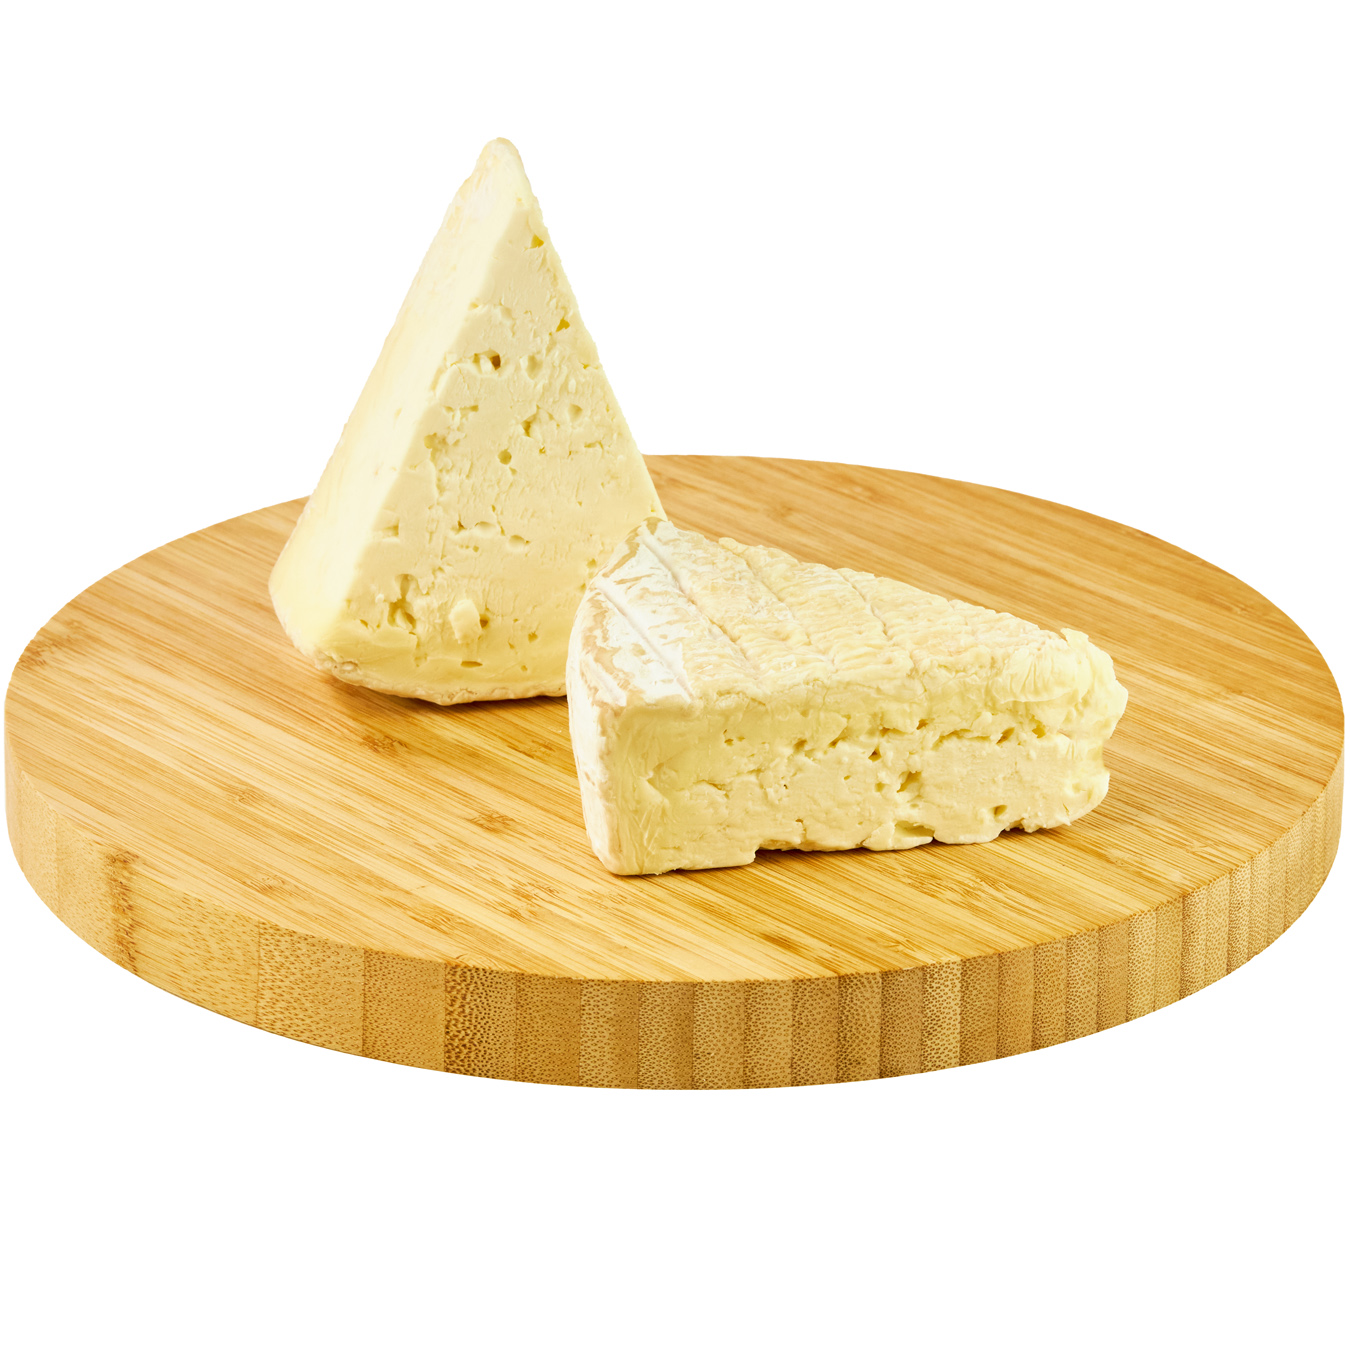 CFR Saint Andre 75% cheese